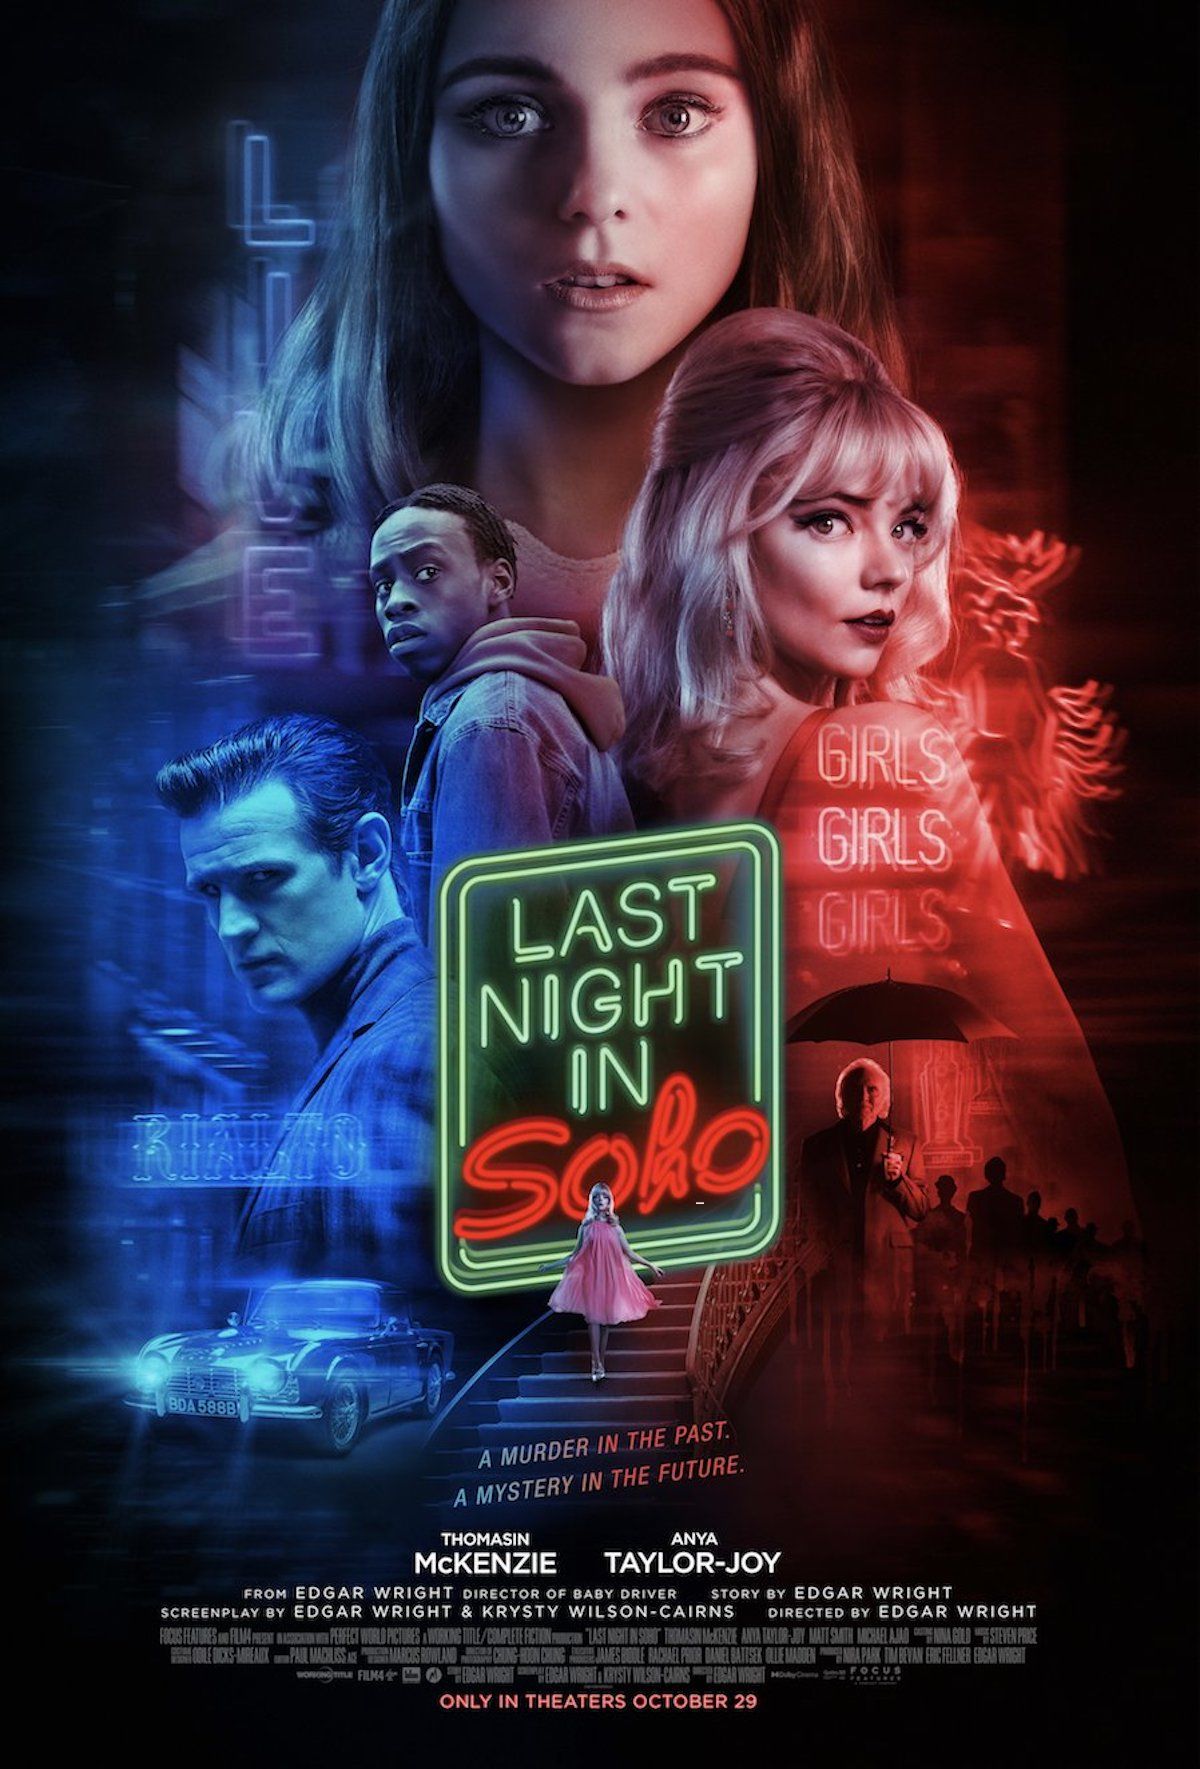 Last Night in Soho Poster Gives a Neon Glow to Edgar Wright’s